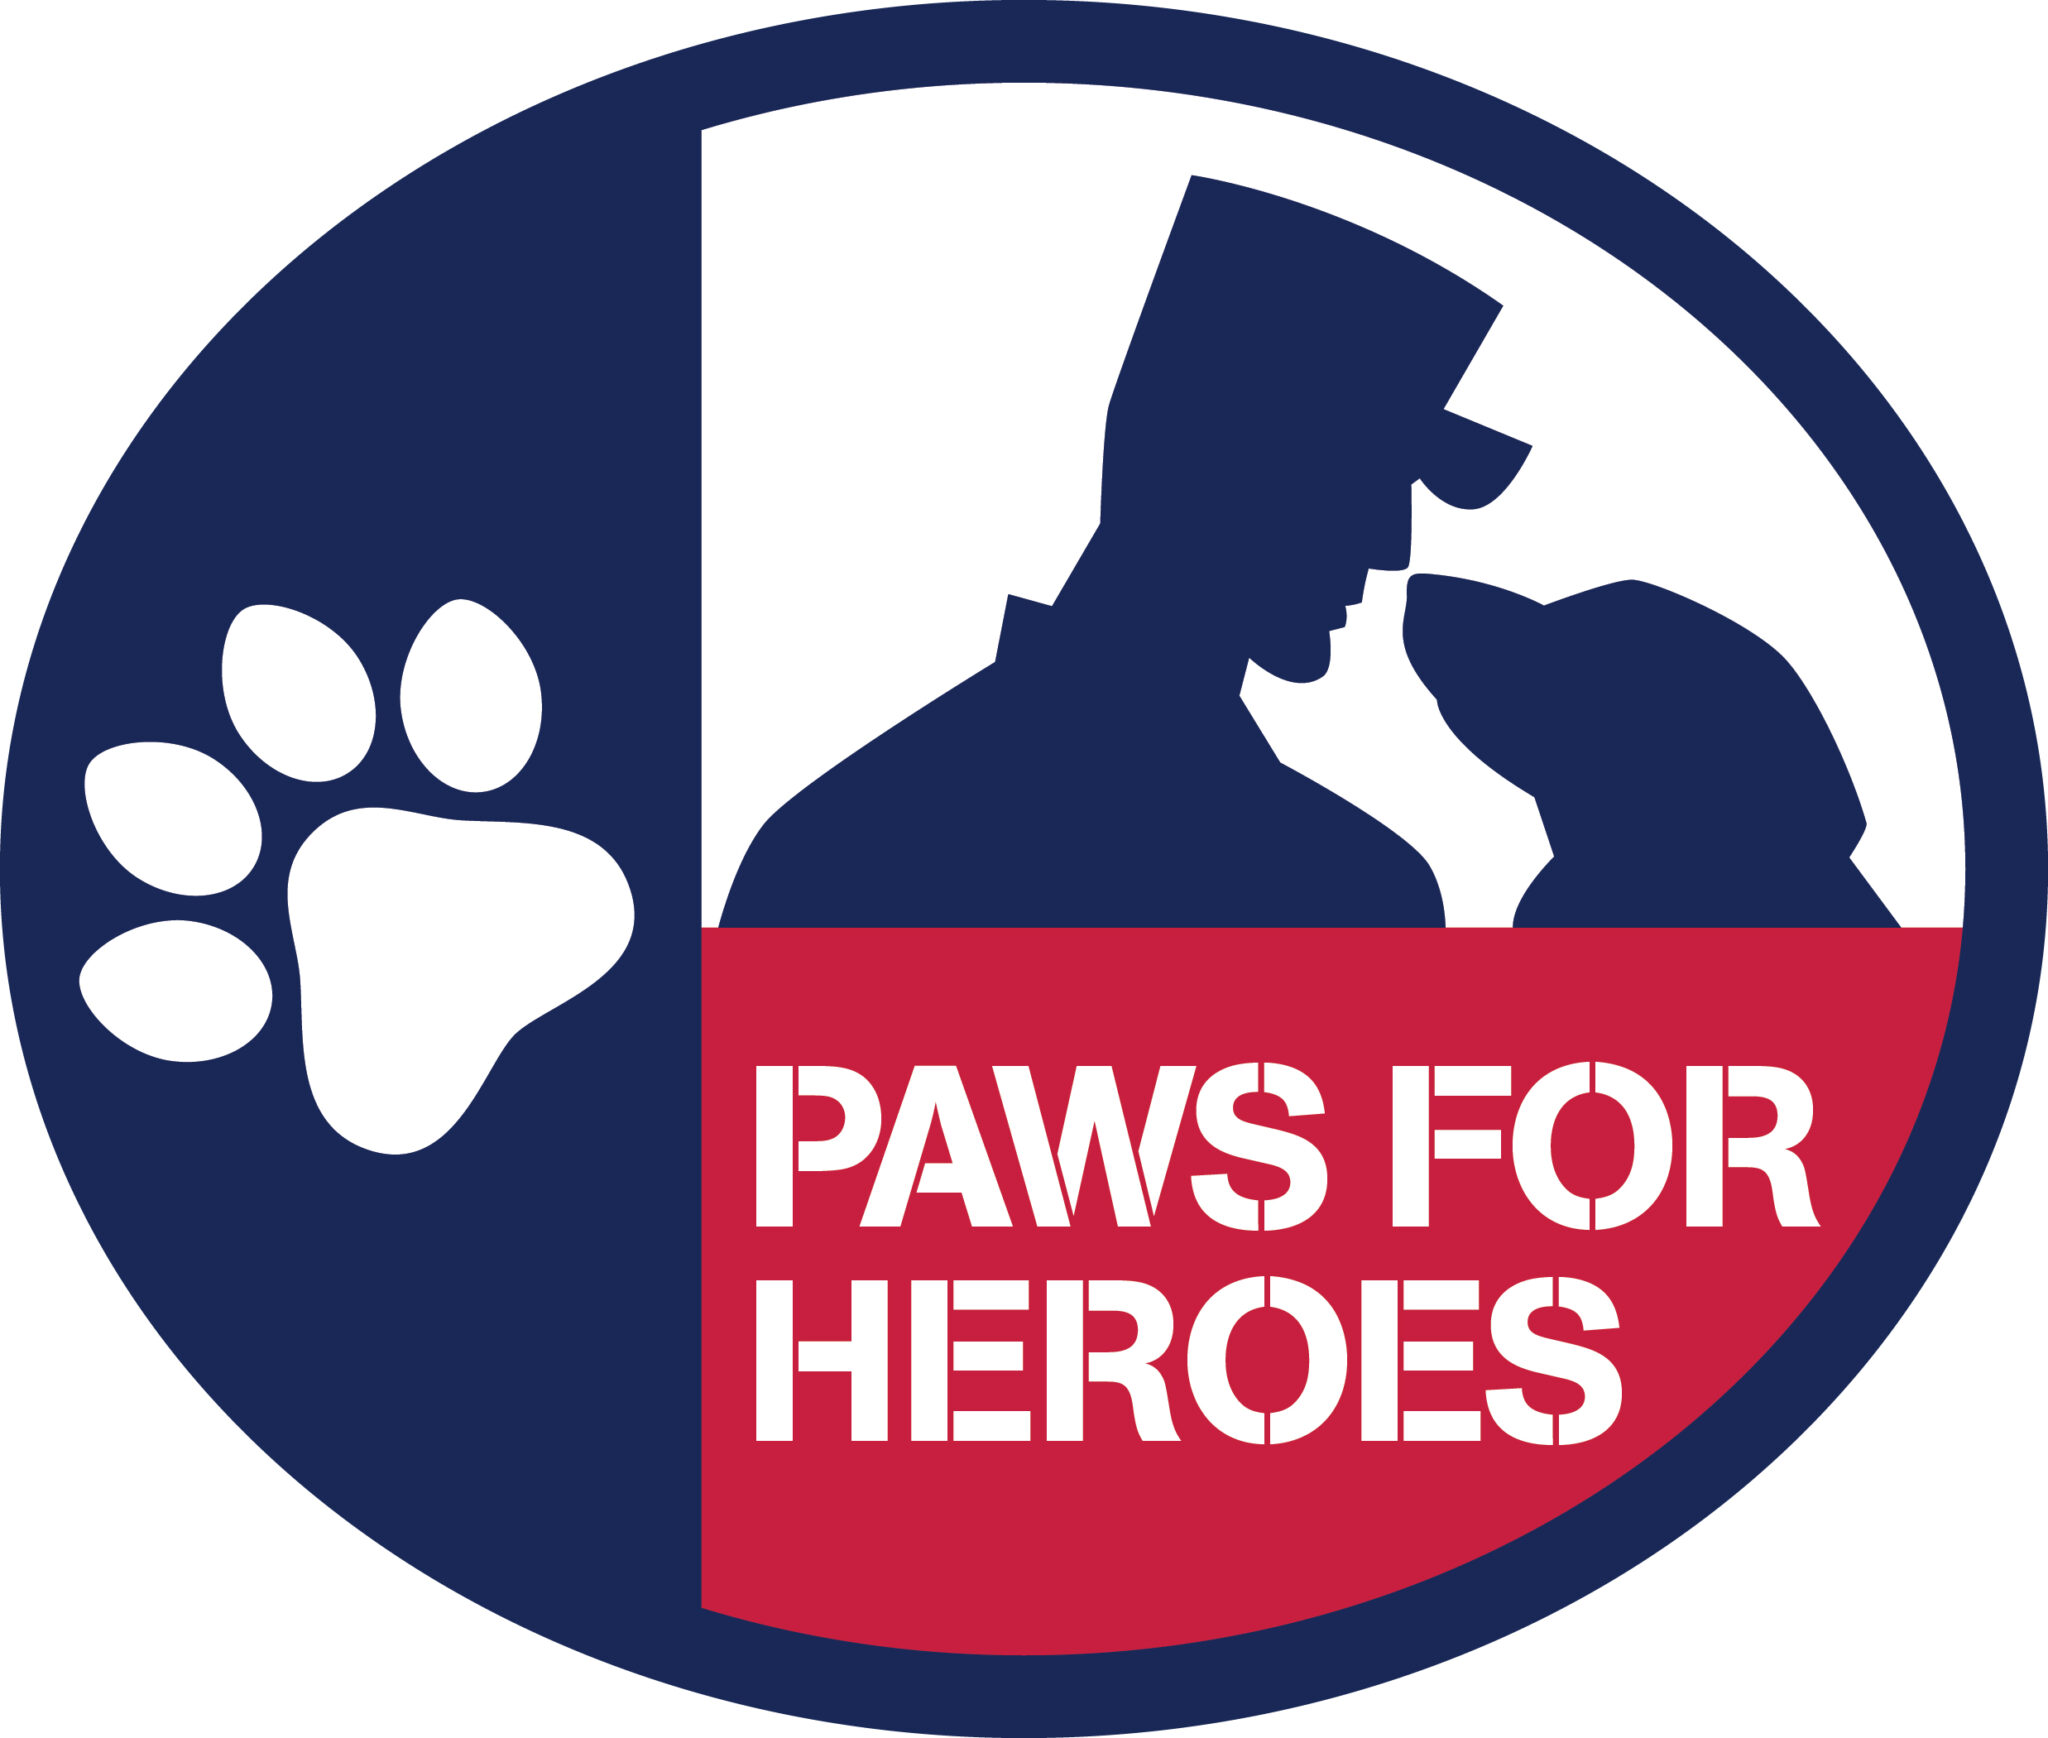 Paws For Heroes logo